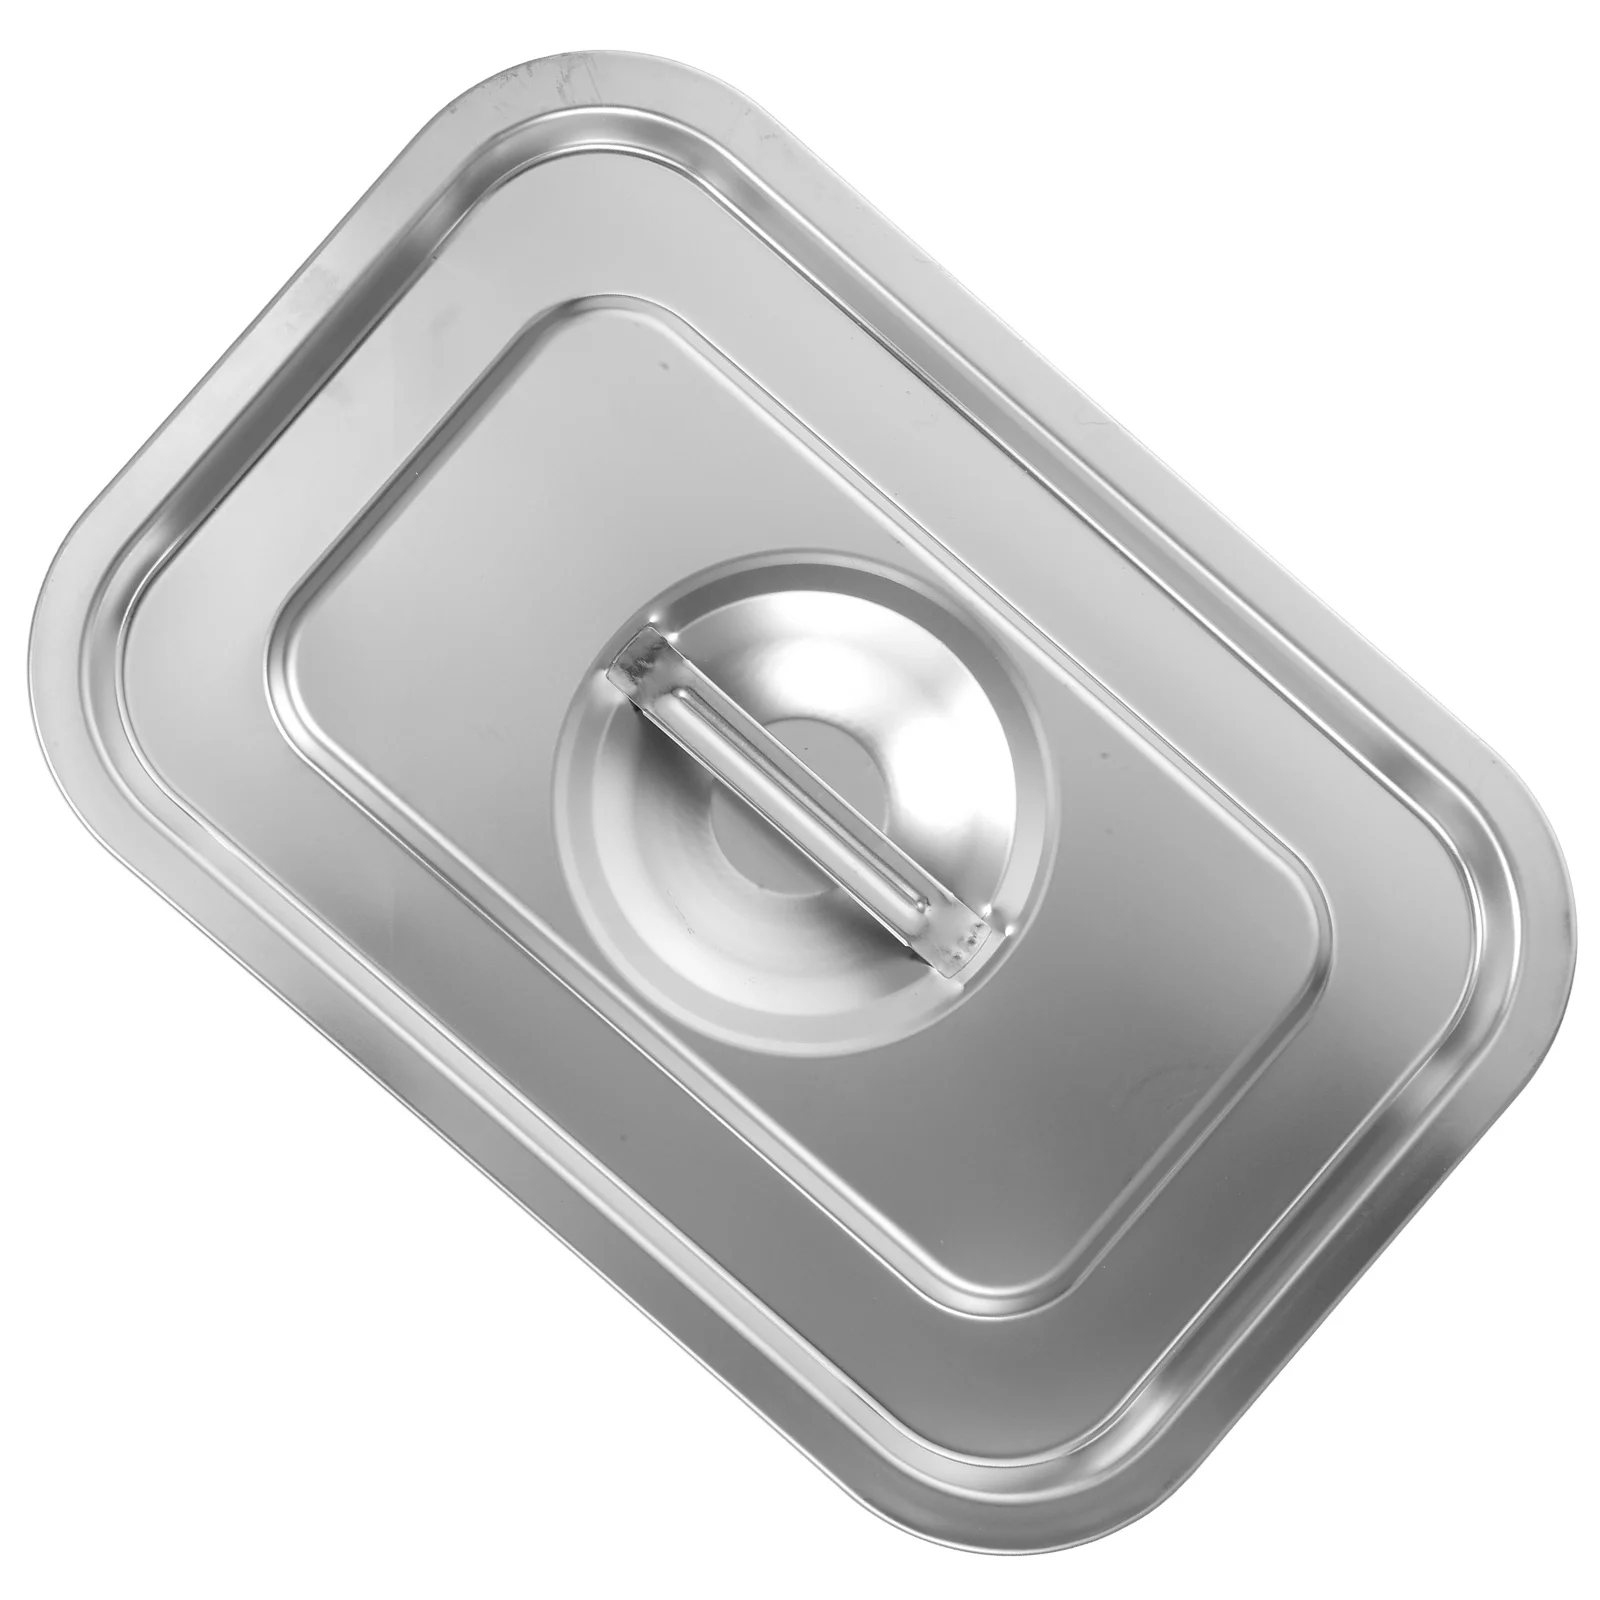 

Protection Cap Food Pan Cover Handle Catering Stainless Steel Steam Lid Rectangular Lids Hotel Serving Pot